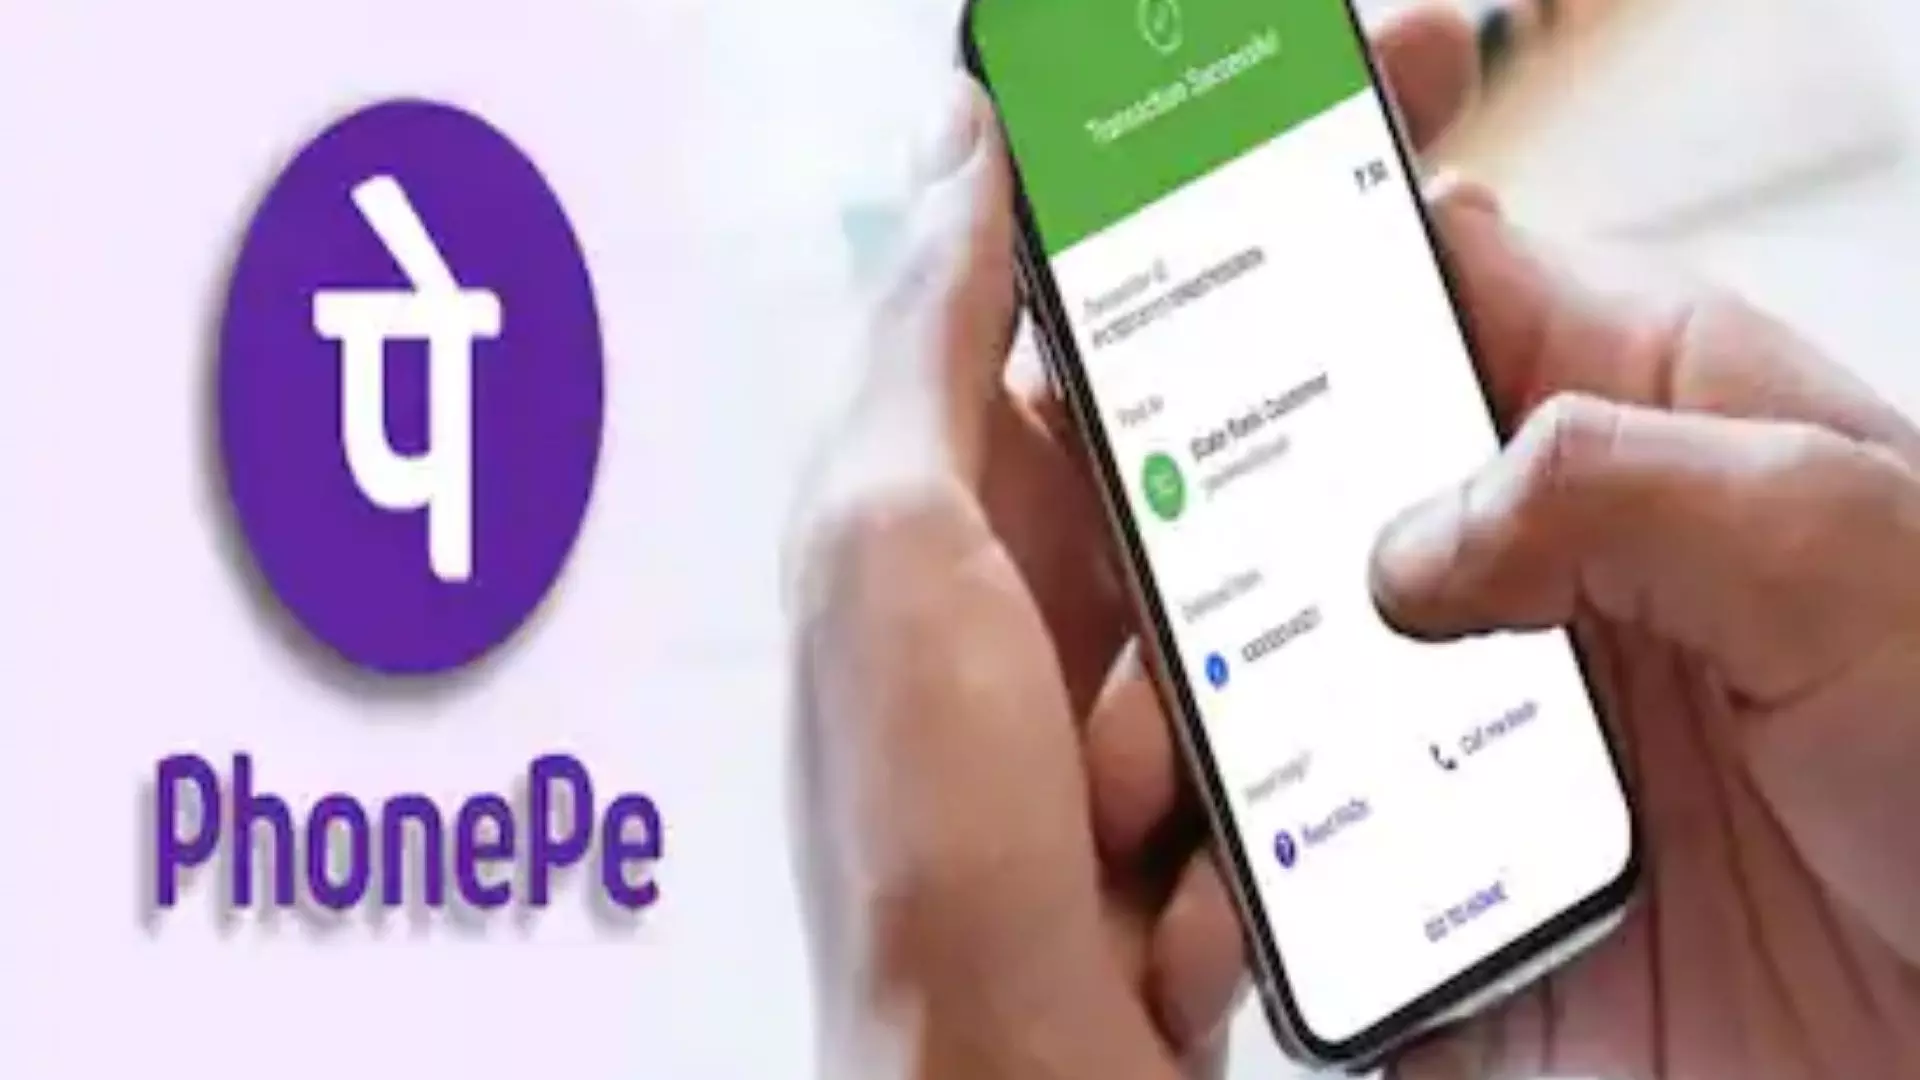 PhonePe Charging a Processing Fee on Prepaid Mobile Recharges